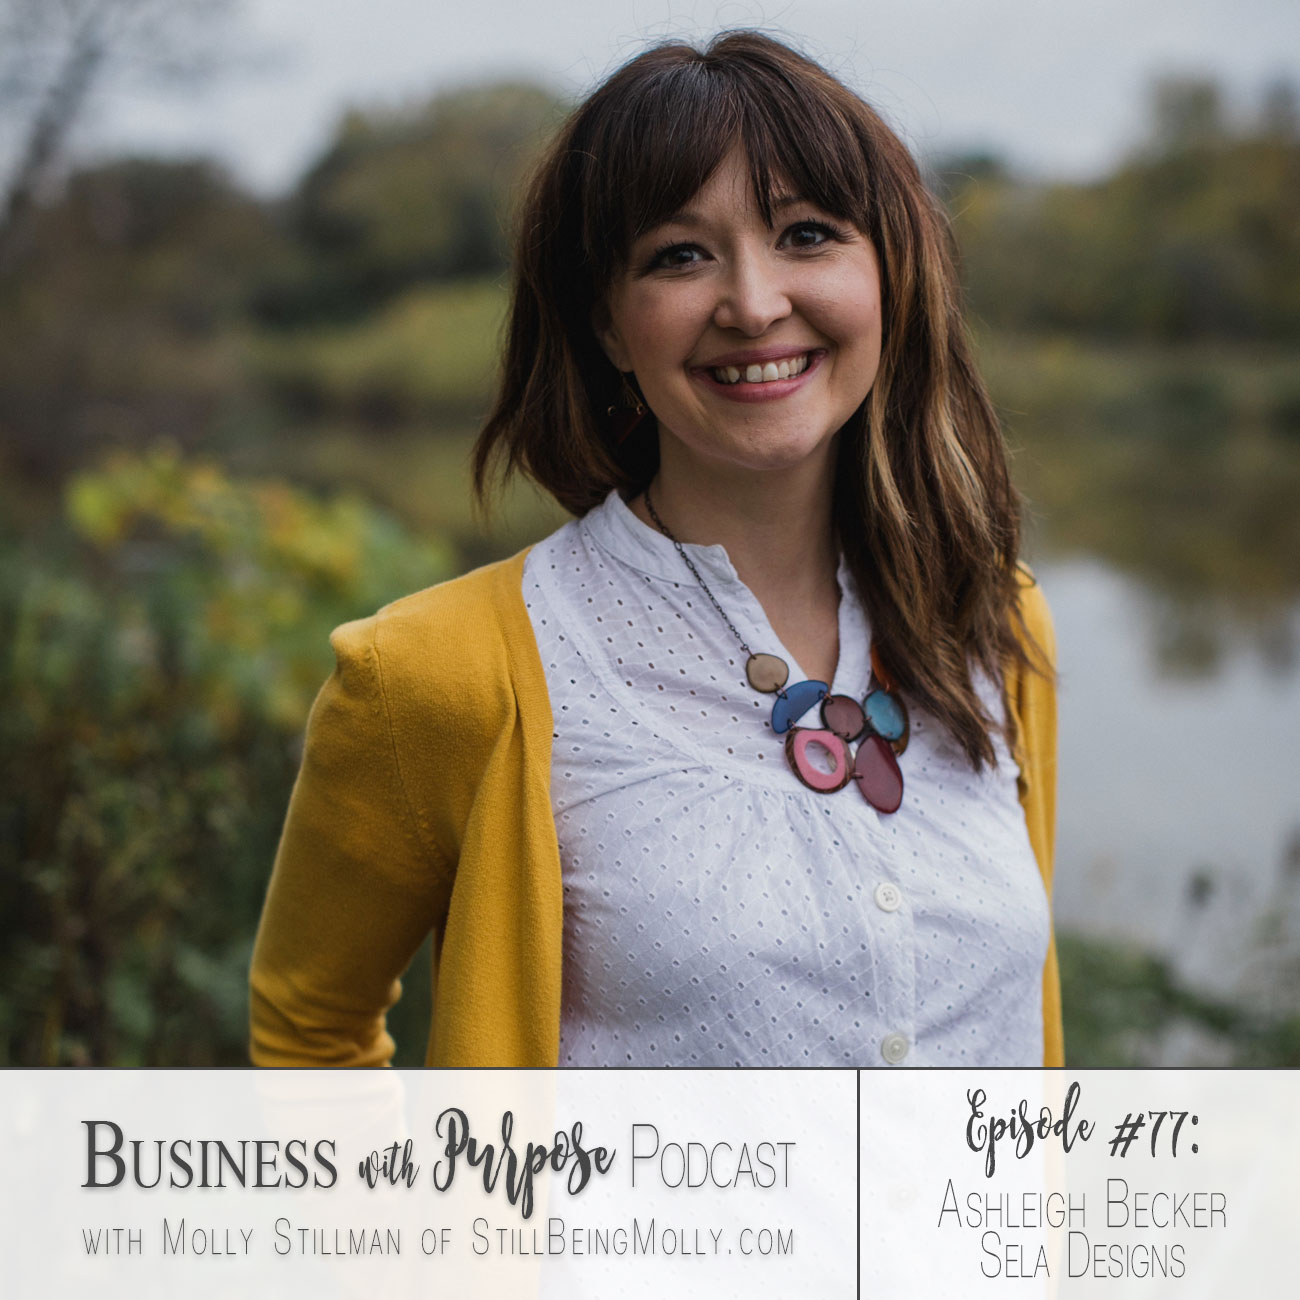 Business with Purpose Podcast EP 77: Ashleigh Becker, founder of Sela Designs by popular North Carolina ethical blogger and podcaster Still Being Molly